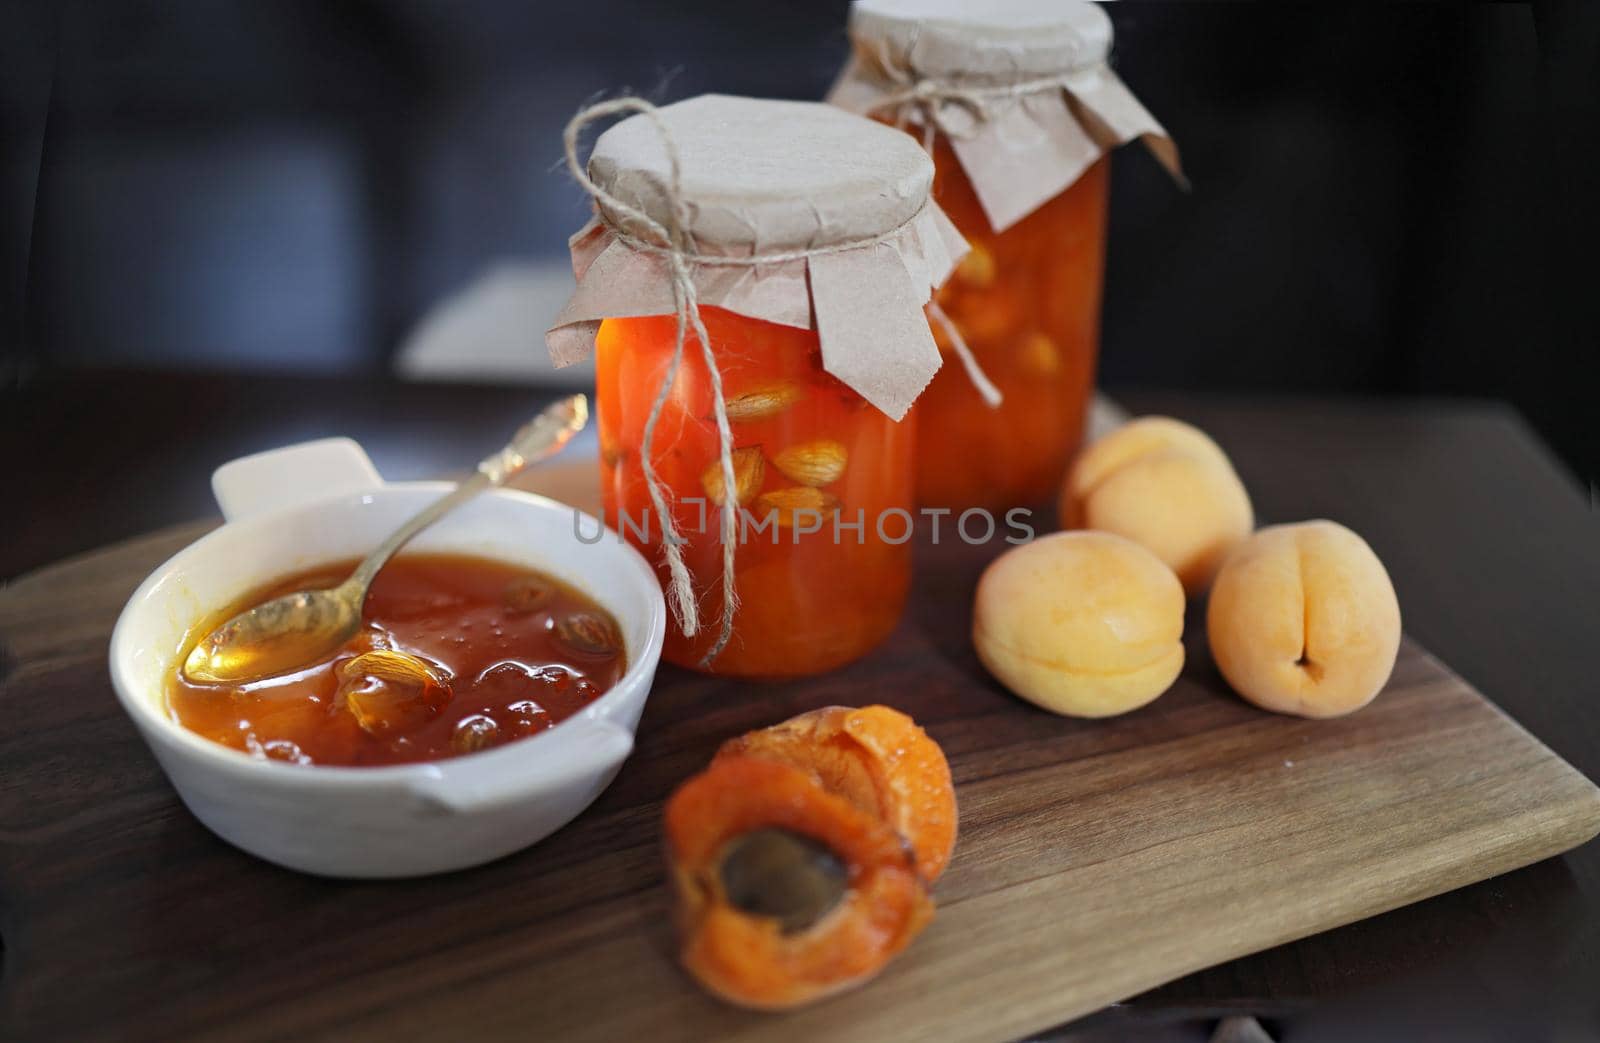 Apricot jam in glass jars on a wooden surface, a small white plate with jam and a miniature spoon. Sunshine, amber jam by Proxima13